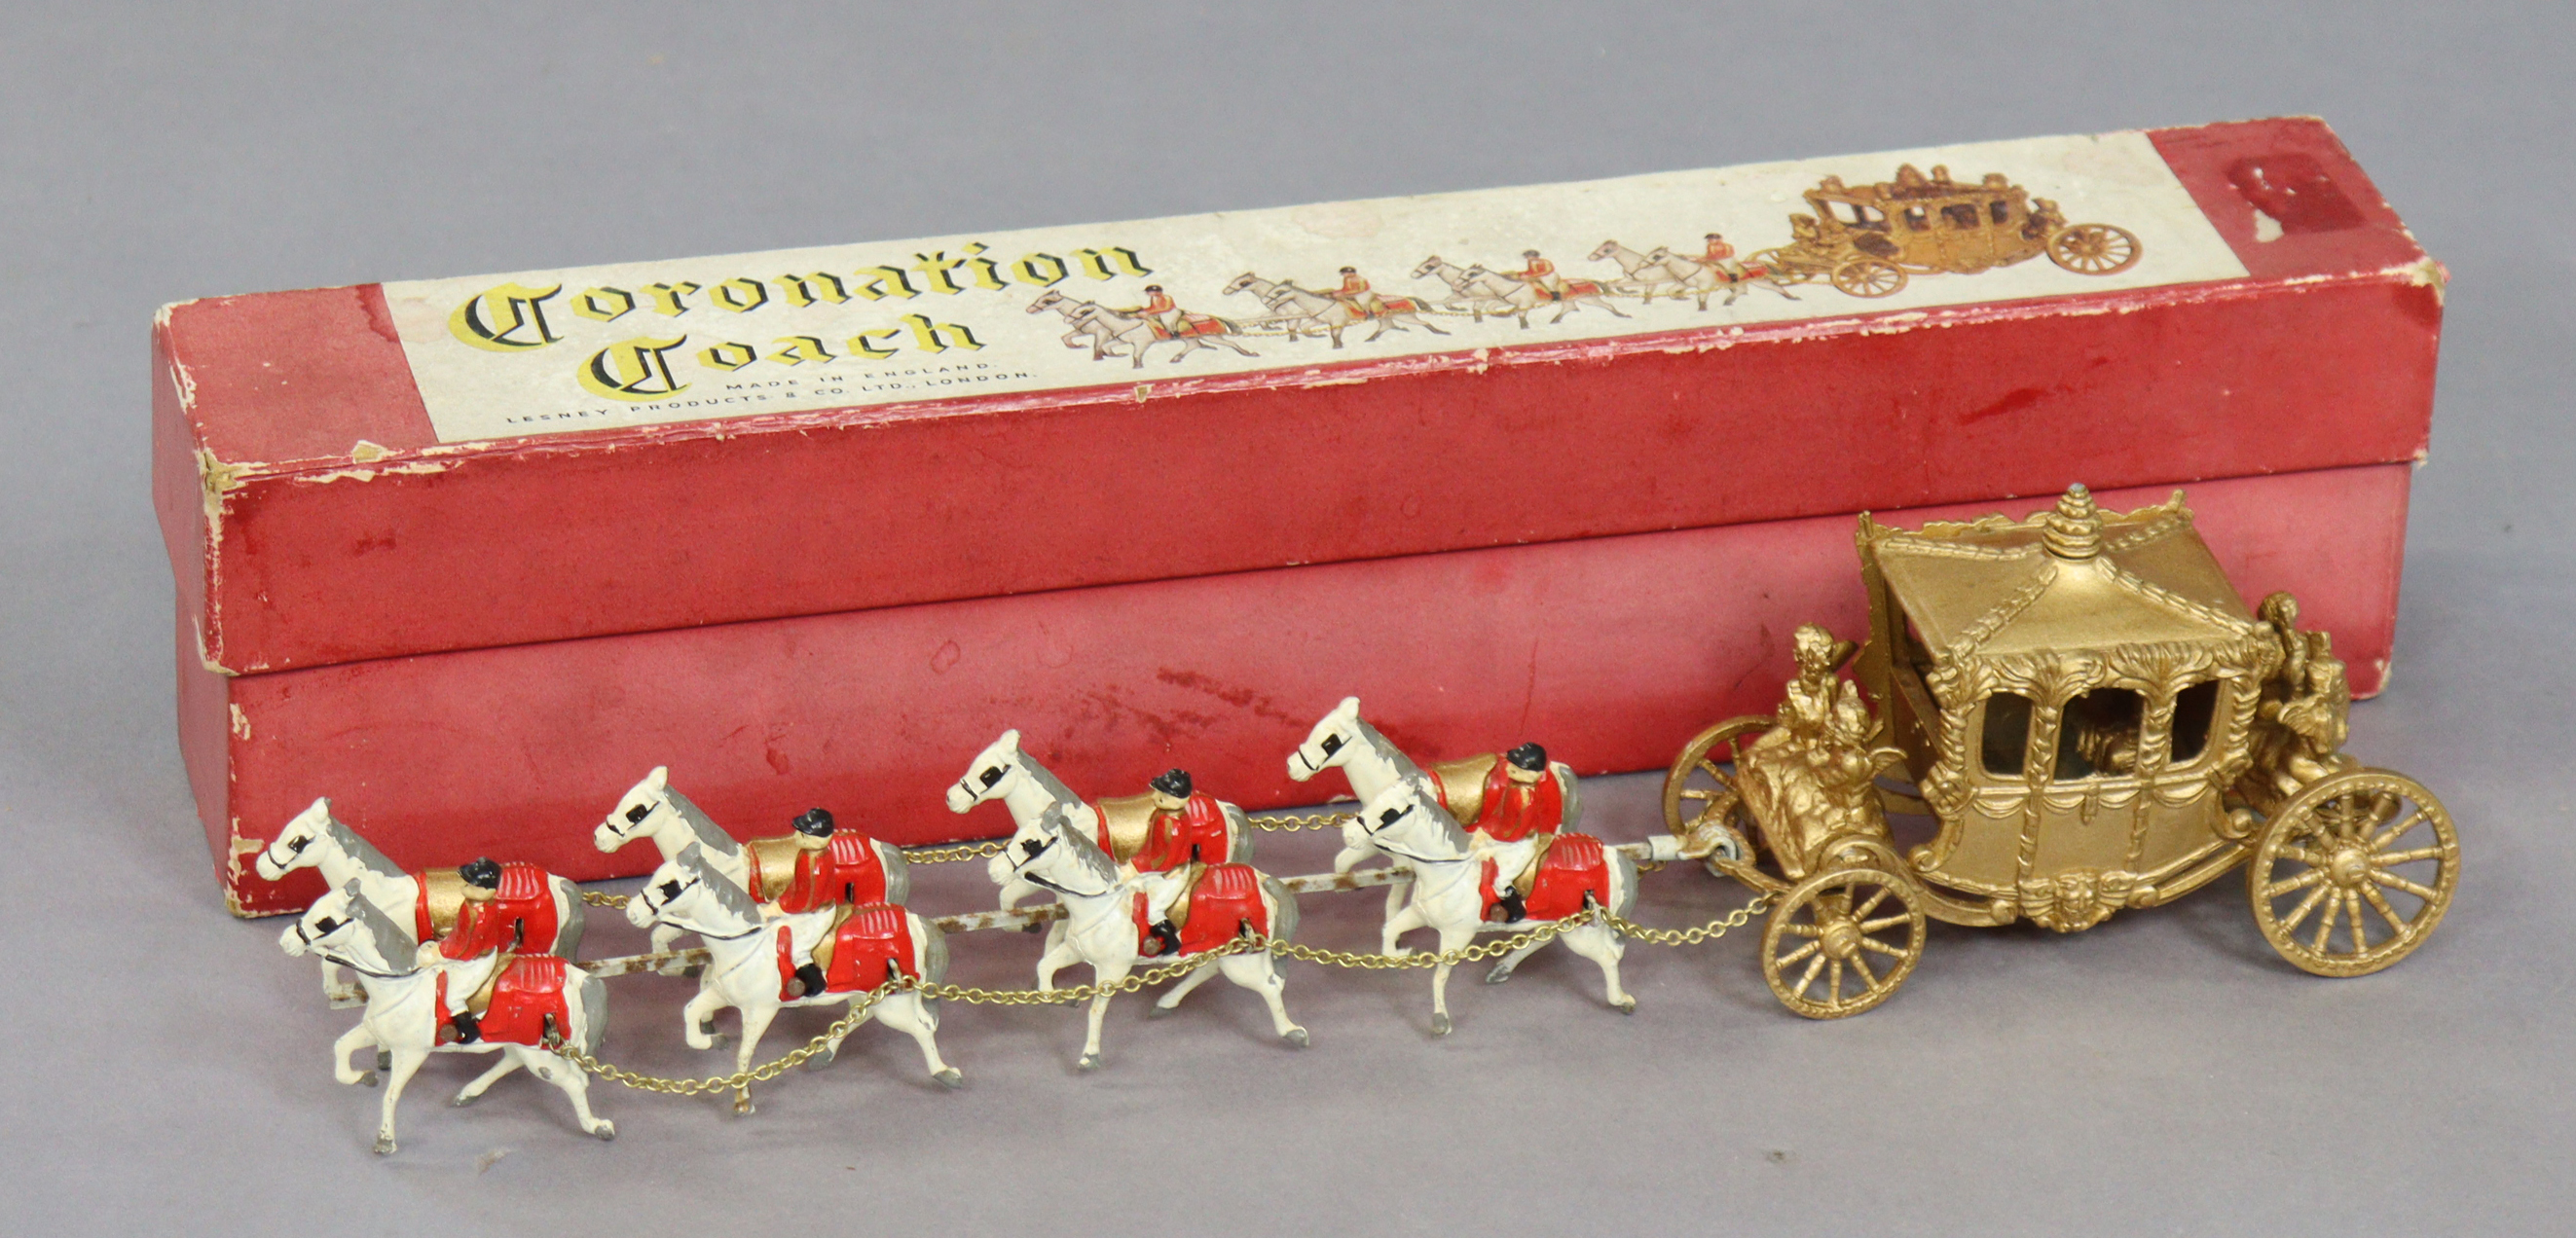 A vintage Lesney model of the “Coronation coach”, boxed.